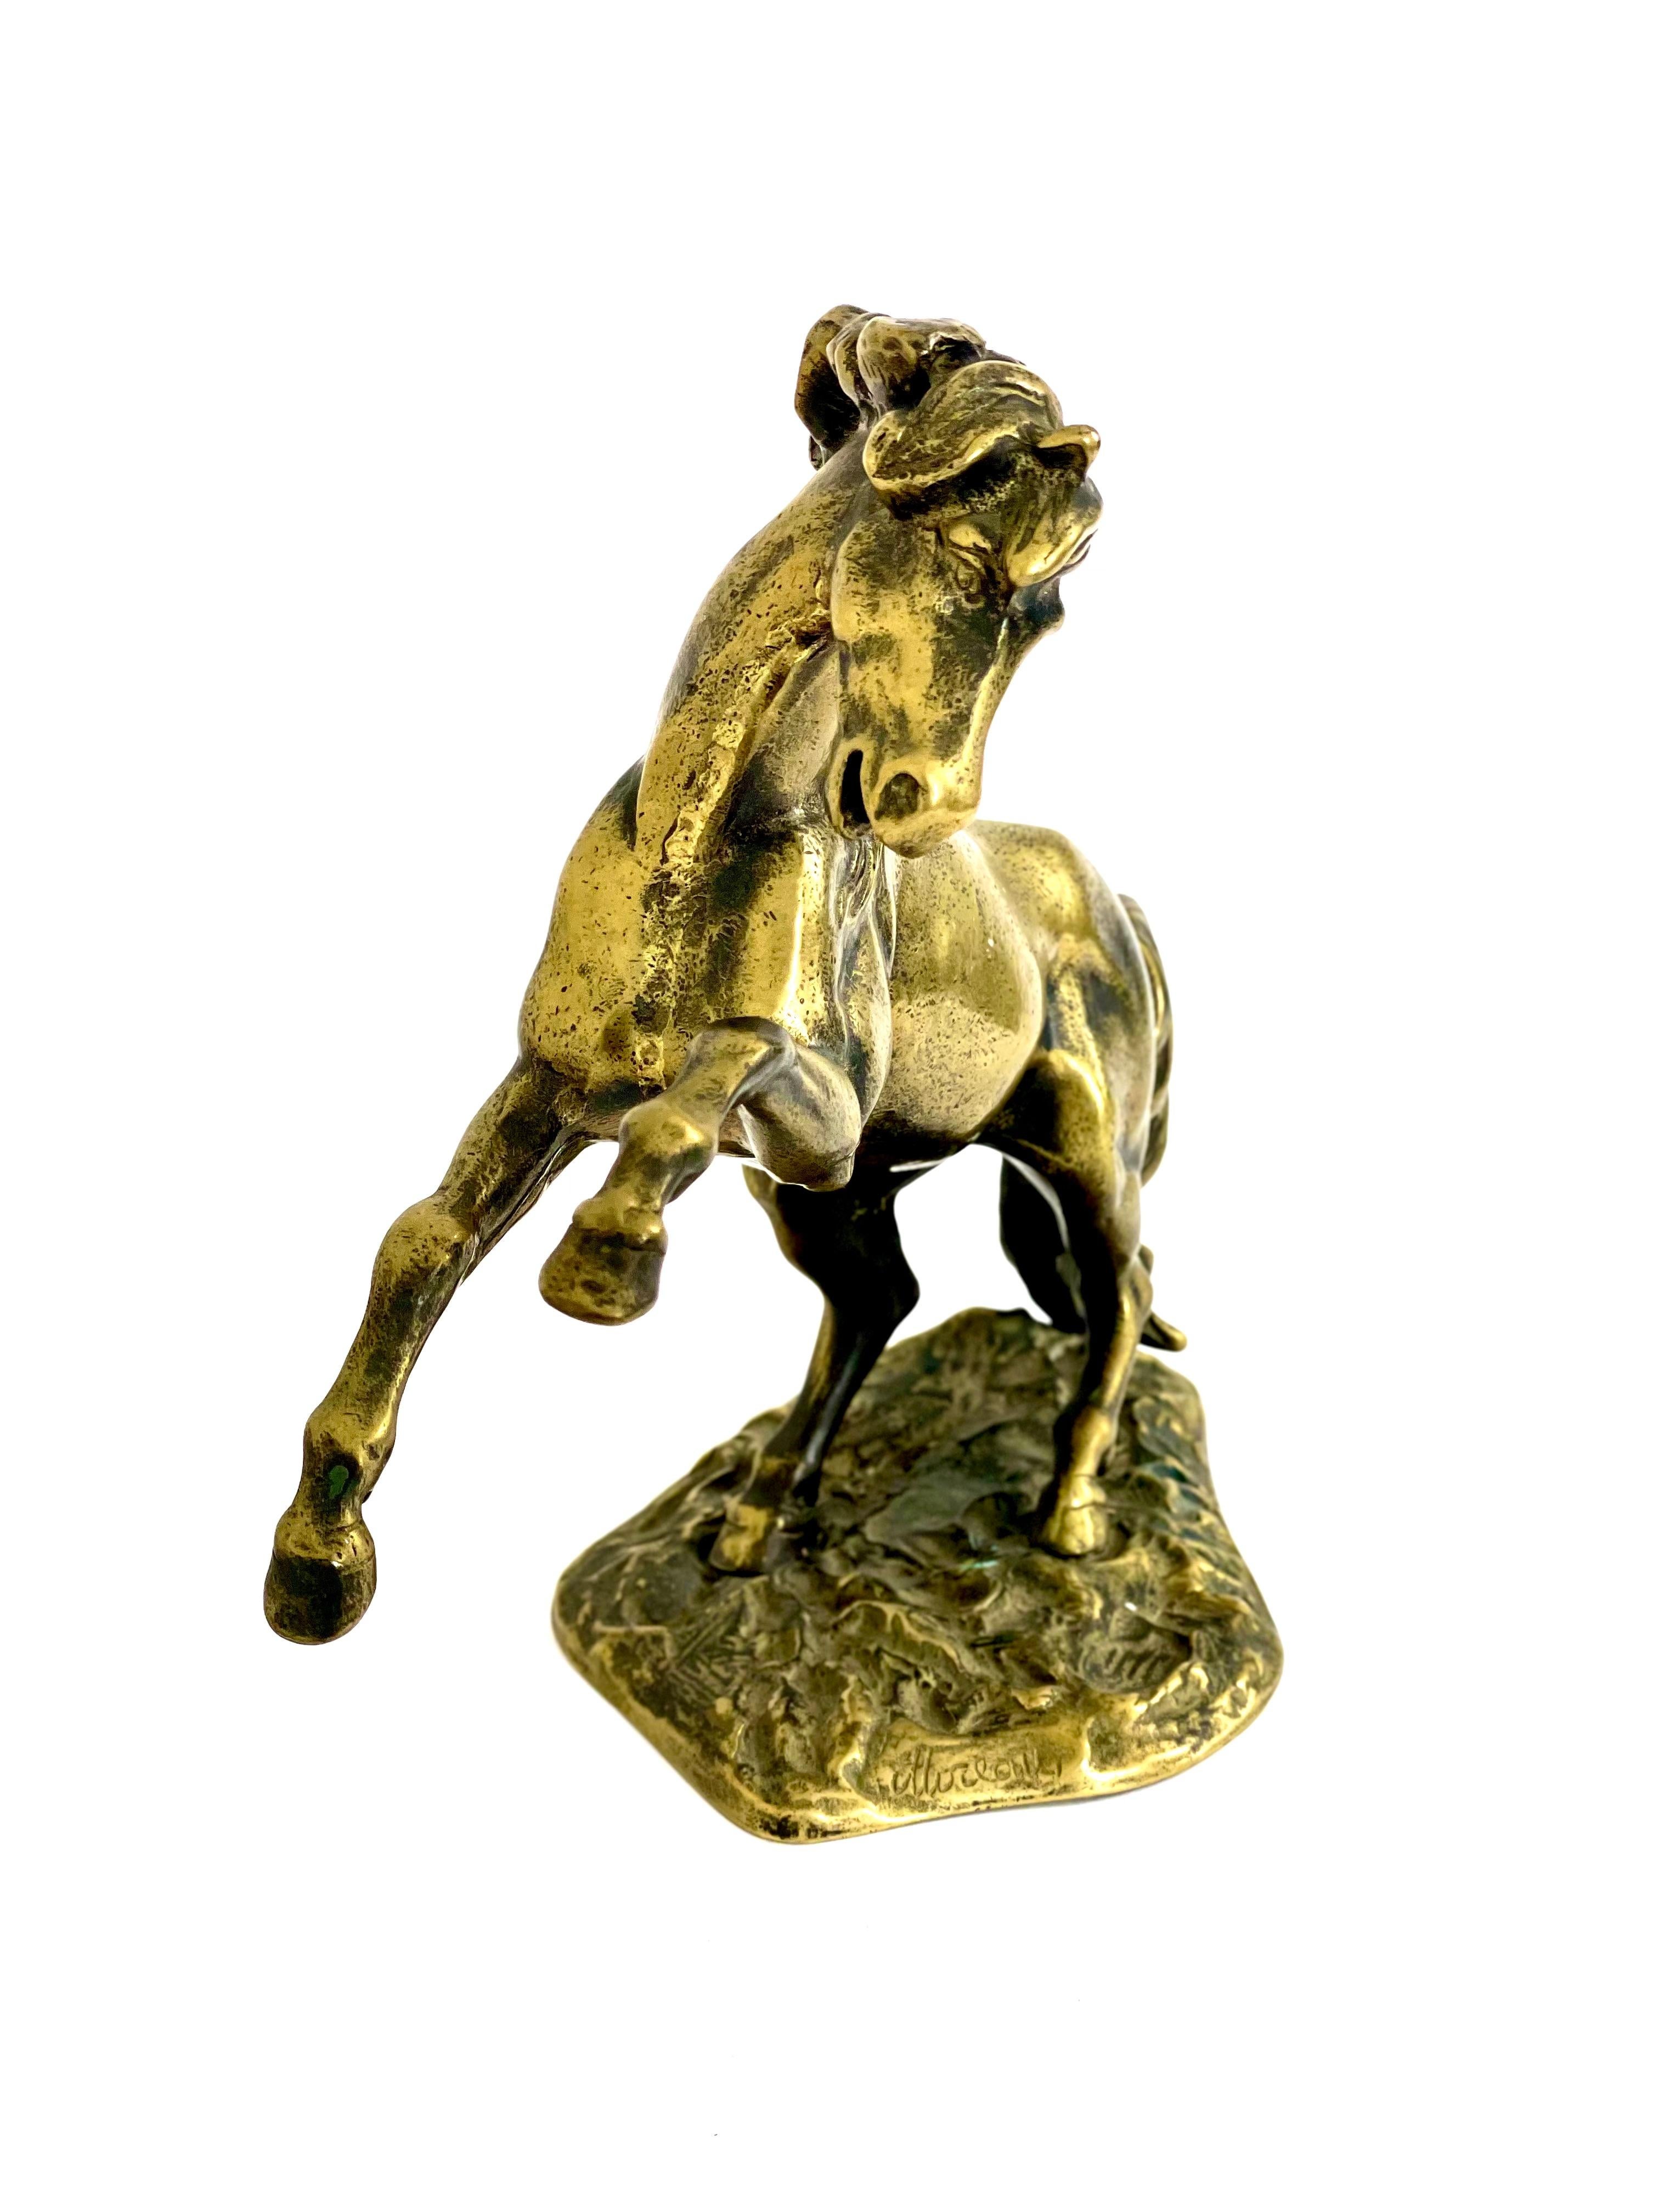 “Prancing Horse in Bronze” by the French sculptor Hippolyte François Moreau (1832-1927). Son of the sculptor Jean-Baptiste Moreau, he created many famous sculptures during his lifetime, most of which are on display at the Musée des Beaux-Arts in